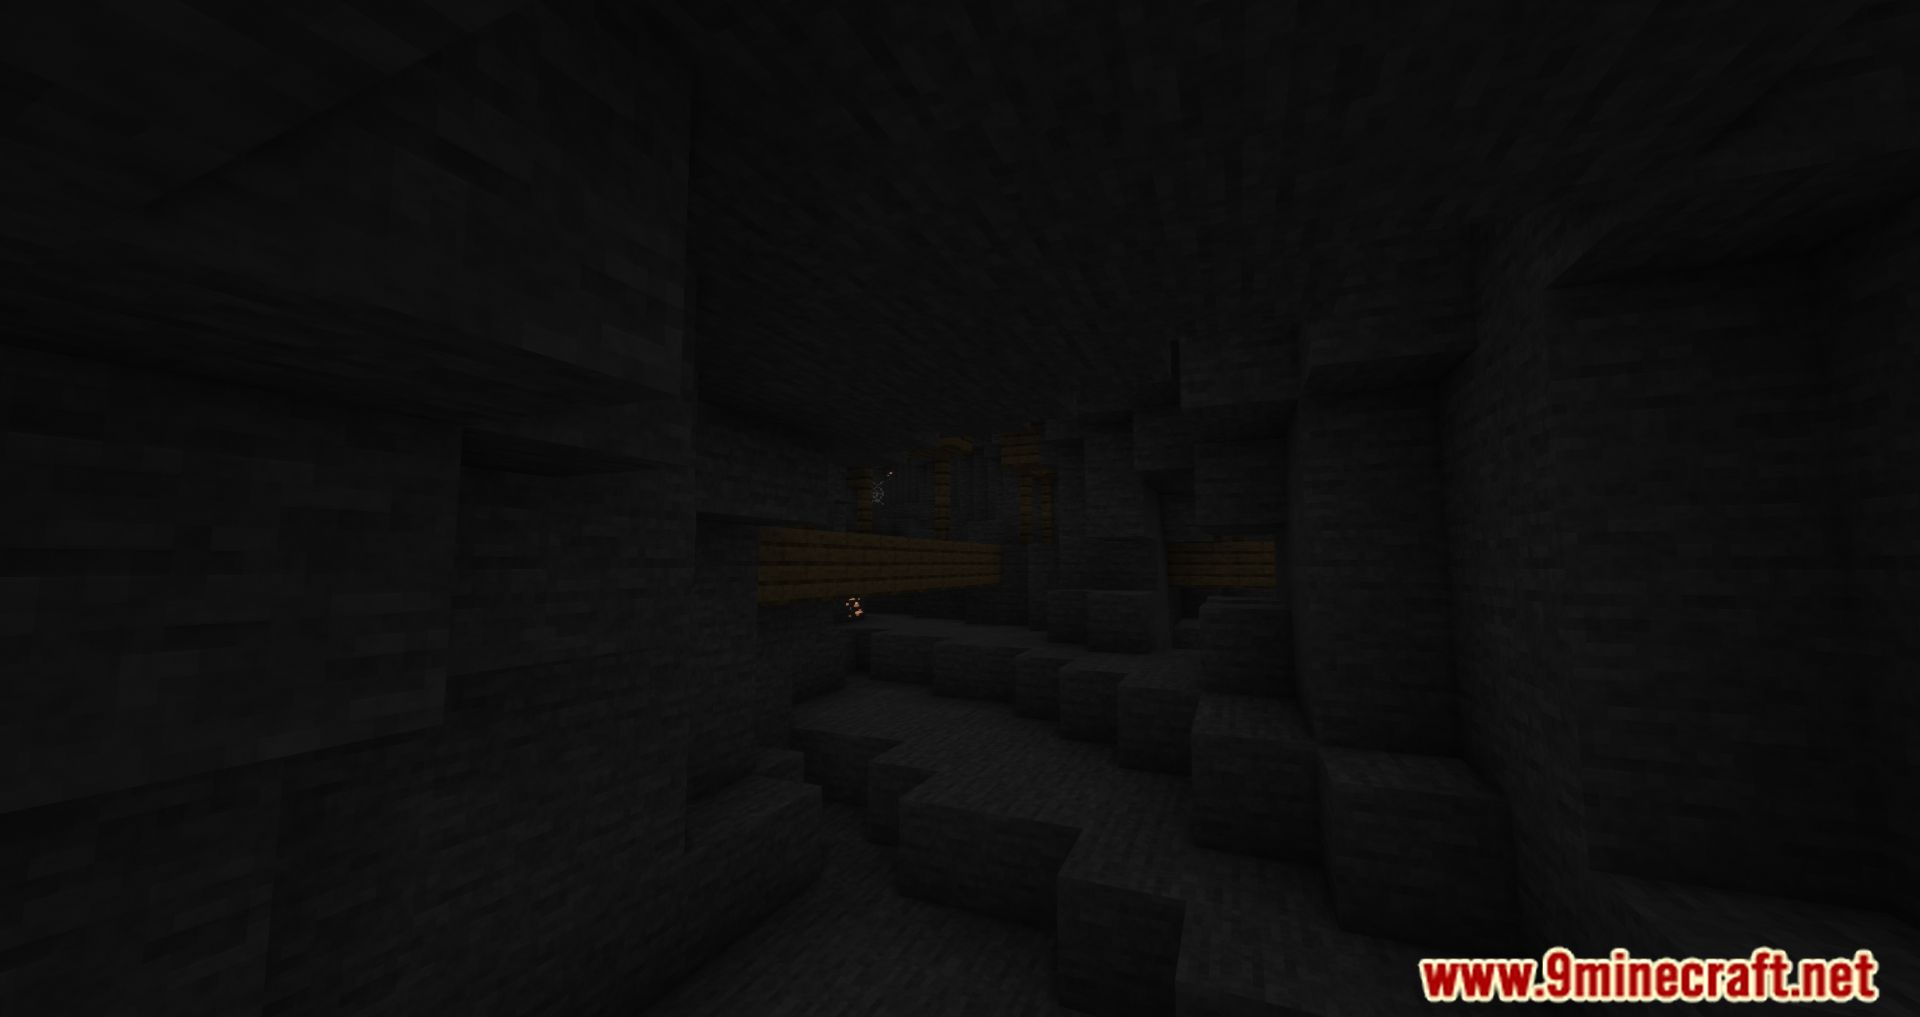 Cave Generator Mod (1.16.5, 1.12.2) - Fully Customize Mojang's Tunnels 6